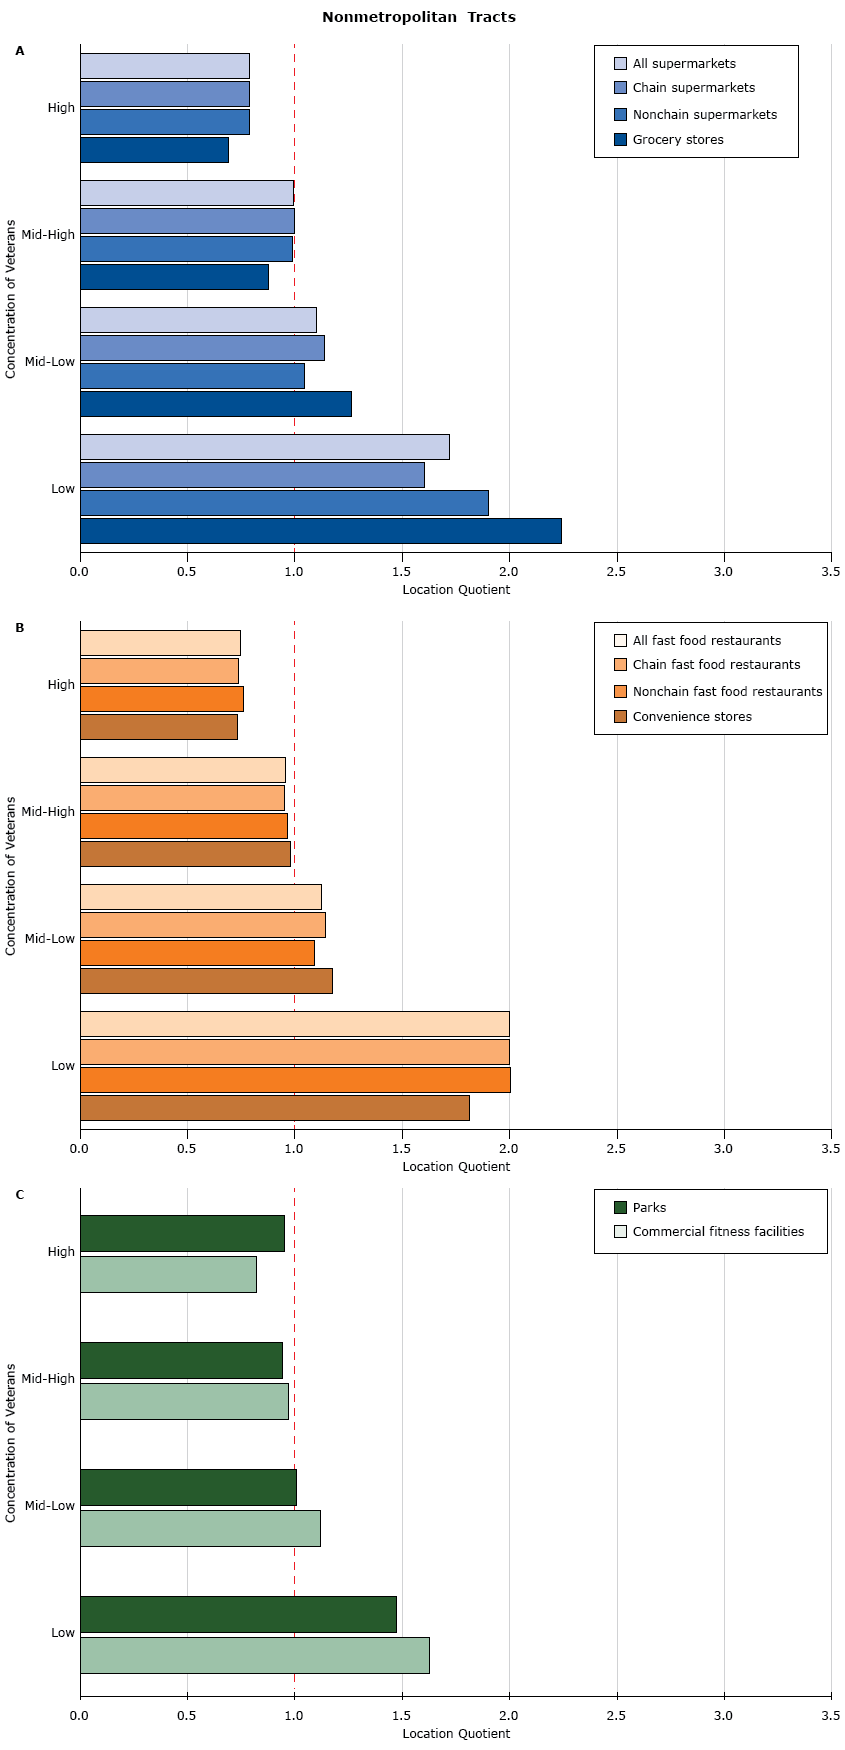 Availability of food outlets and recreational venues in nonmetropolitan census tracts, by quartile of concentrations of veterans (the percentage of veterans among the adult population), relative to all US census tracts, as measured by the location quotient. The greater the location quotient, the greater the availability of a residential environmental attribute relative to all locations in a sample. A location quotient equal to 1.0 (indicated by the red dashed line) indicates that availability in sample is equal to availability across all US census tracts: A) supermarkets and grocery stores, B) fast food restaurants and convenience stores, and C) recreational venues. Quartiles of veteran concentration were categorized as low (0%–6.0%), mid-low (6.0%–8.8%), mid-high (8.8%–11.5%), and high (11.5%–100%).